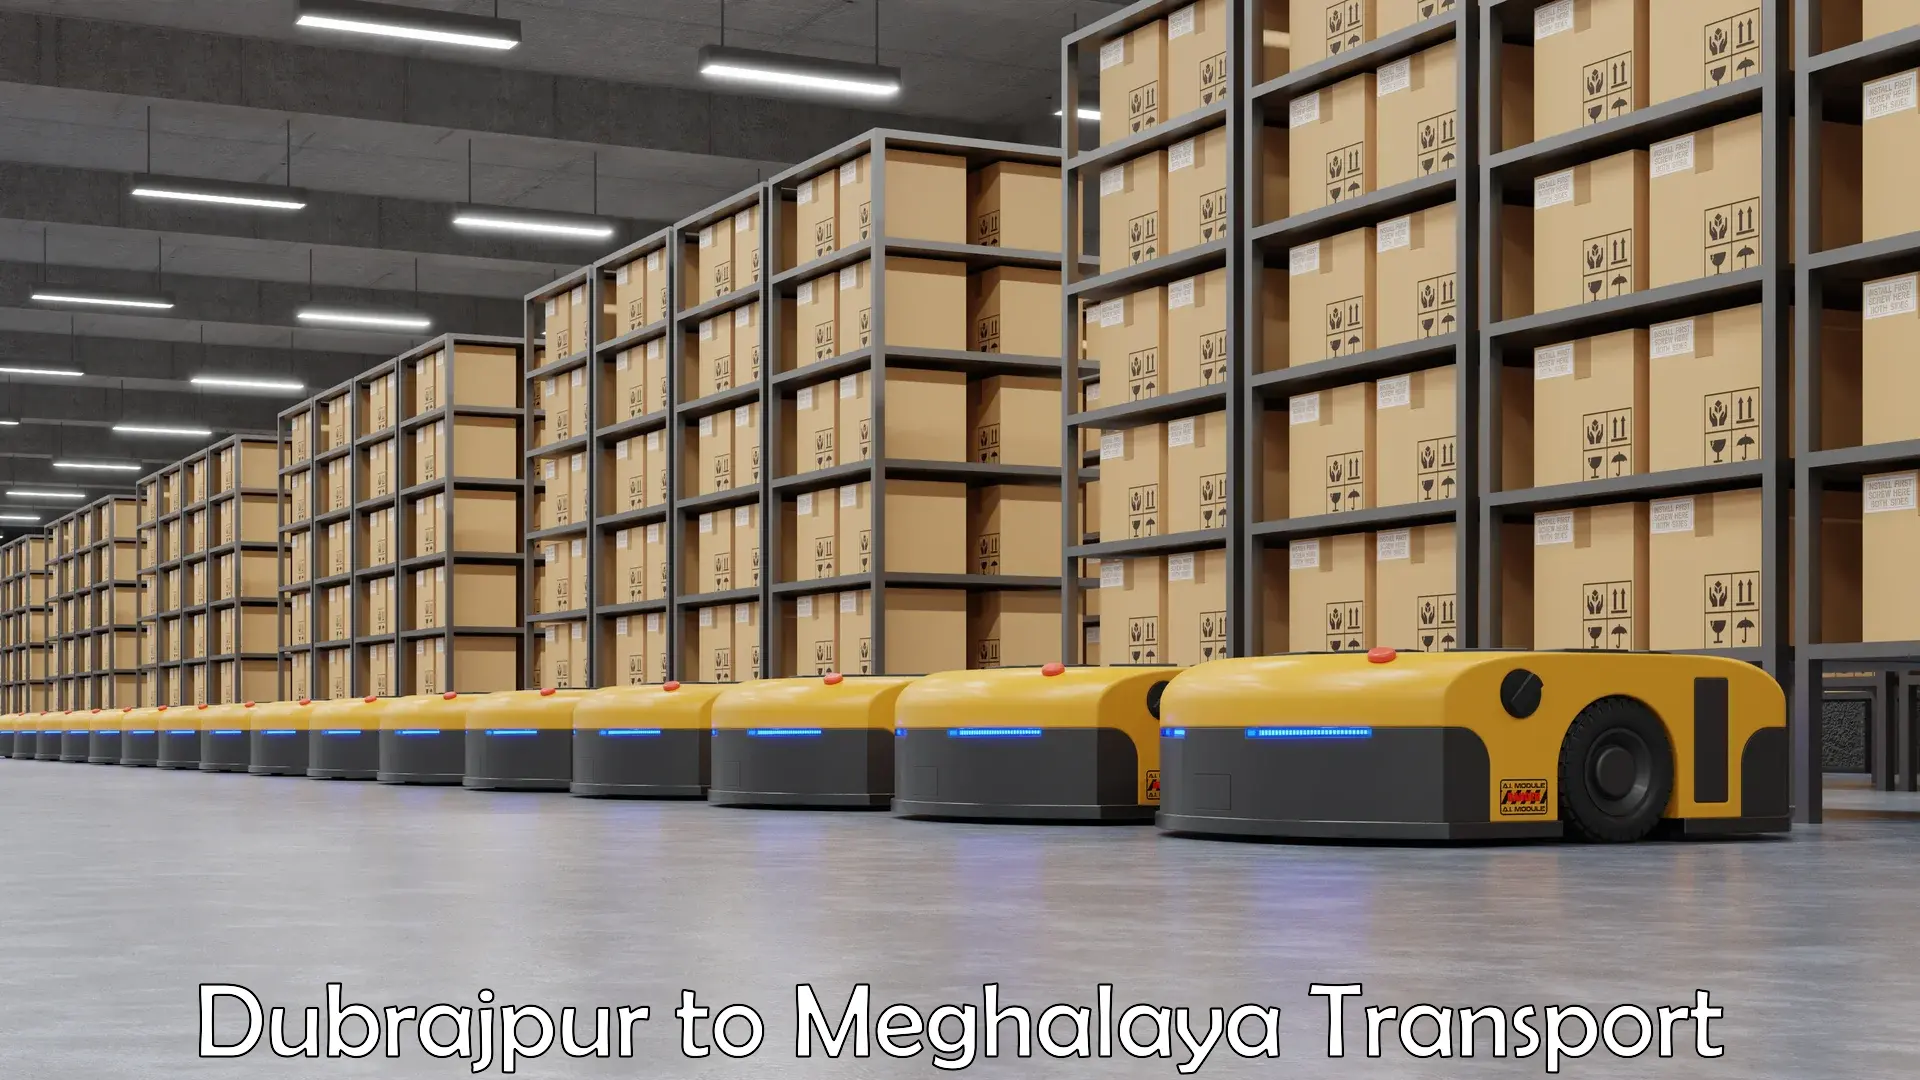 Daily parcel service transport Dubrajpur to Meghalaya